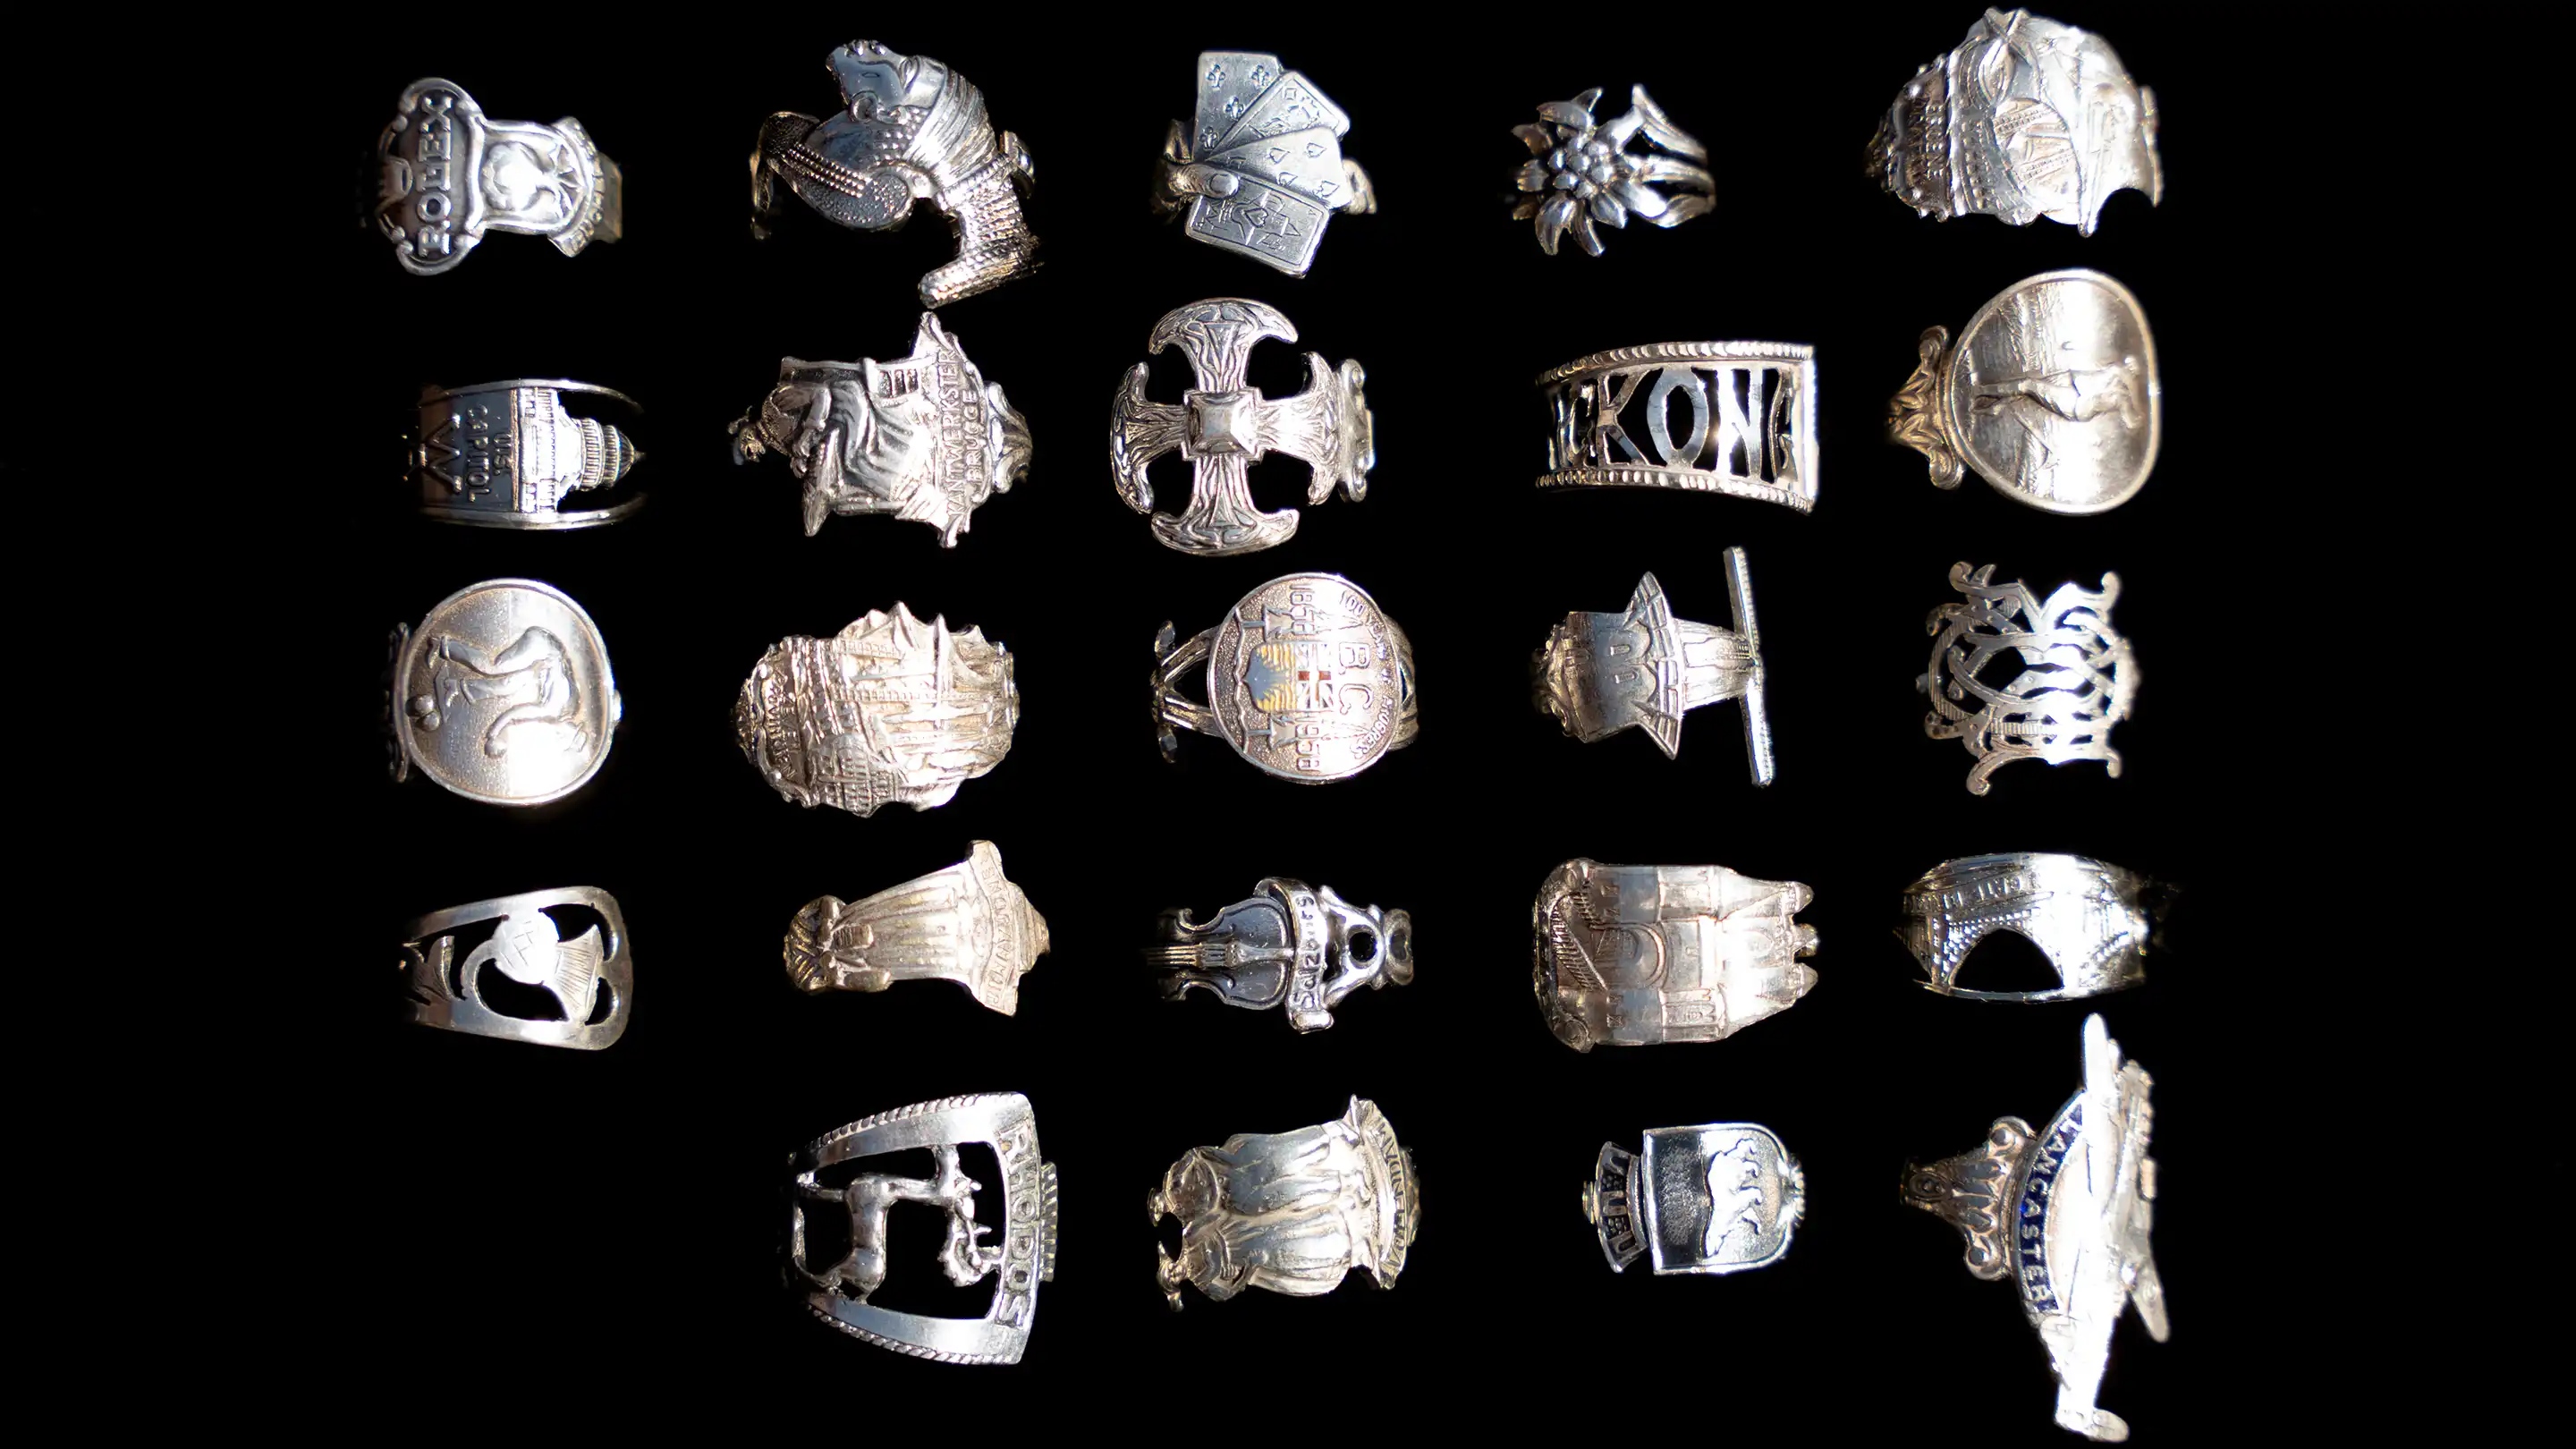 A collection of Josh's spoon rings for sale - Silvawear.